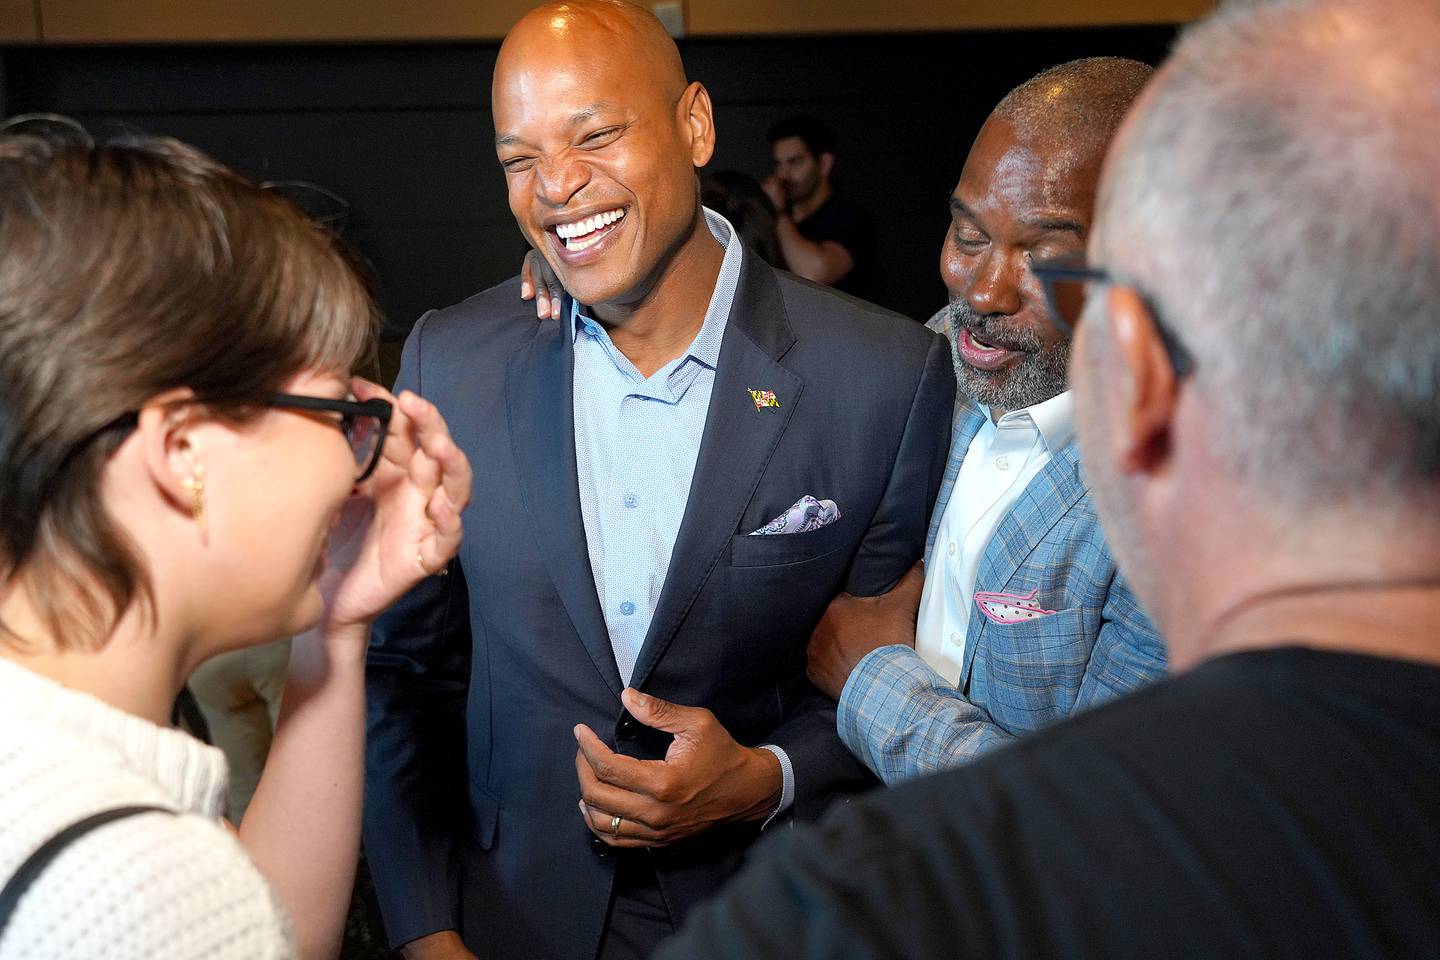 Democratic candidate for Maryland Governor Wes Moore and running mate for Lt Governor, Aruna Miller, held  fundraiser at Reginald F. Lewis Museum